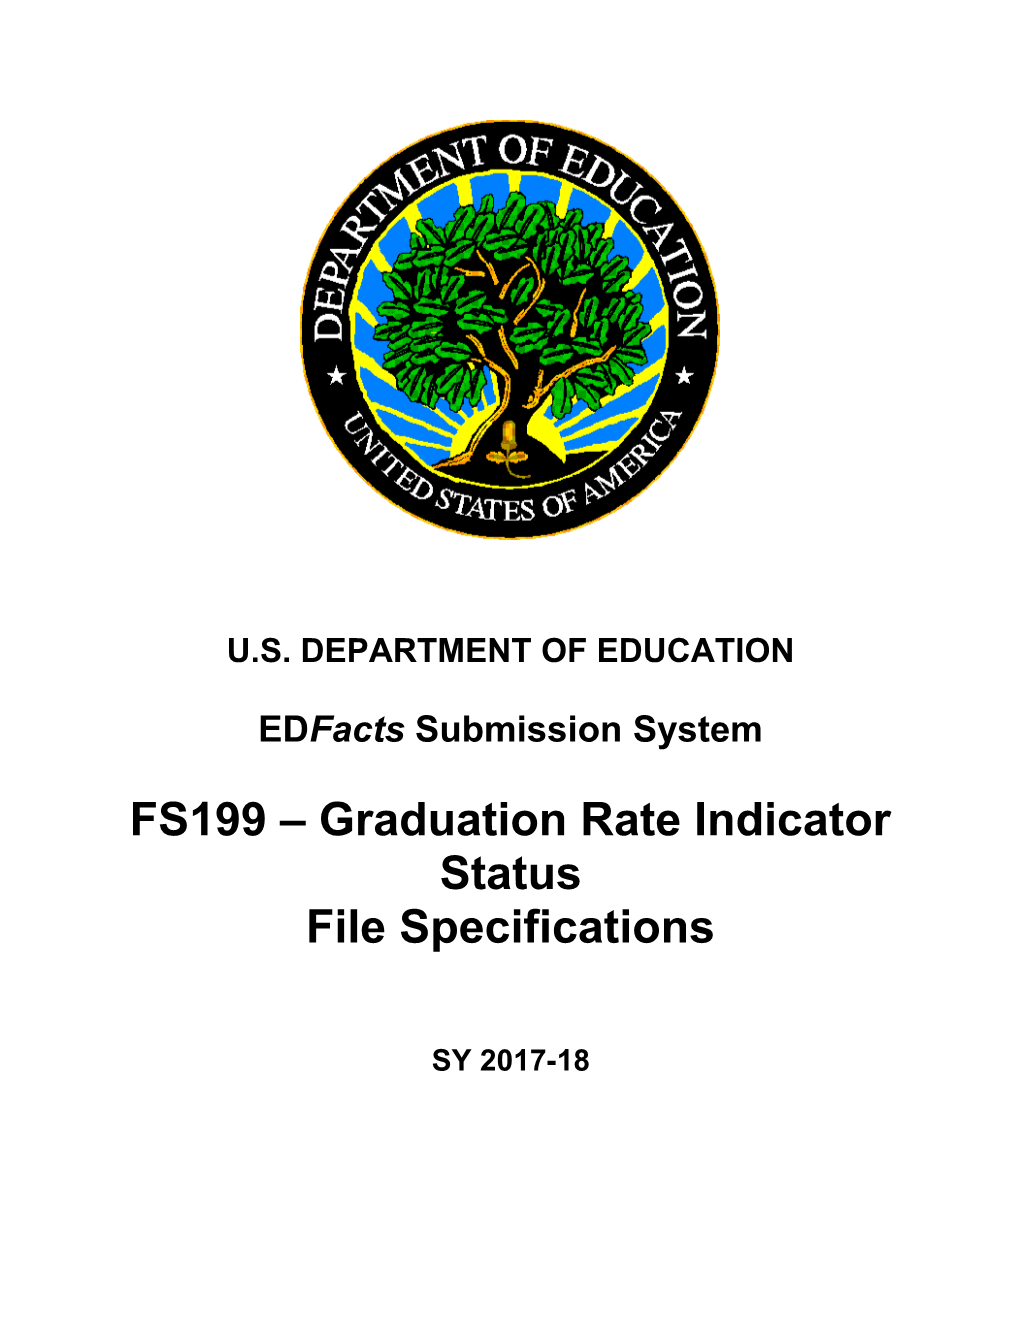 FS199 - Graduation Rate Indicator Status File Specifications (Msword)